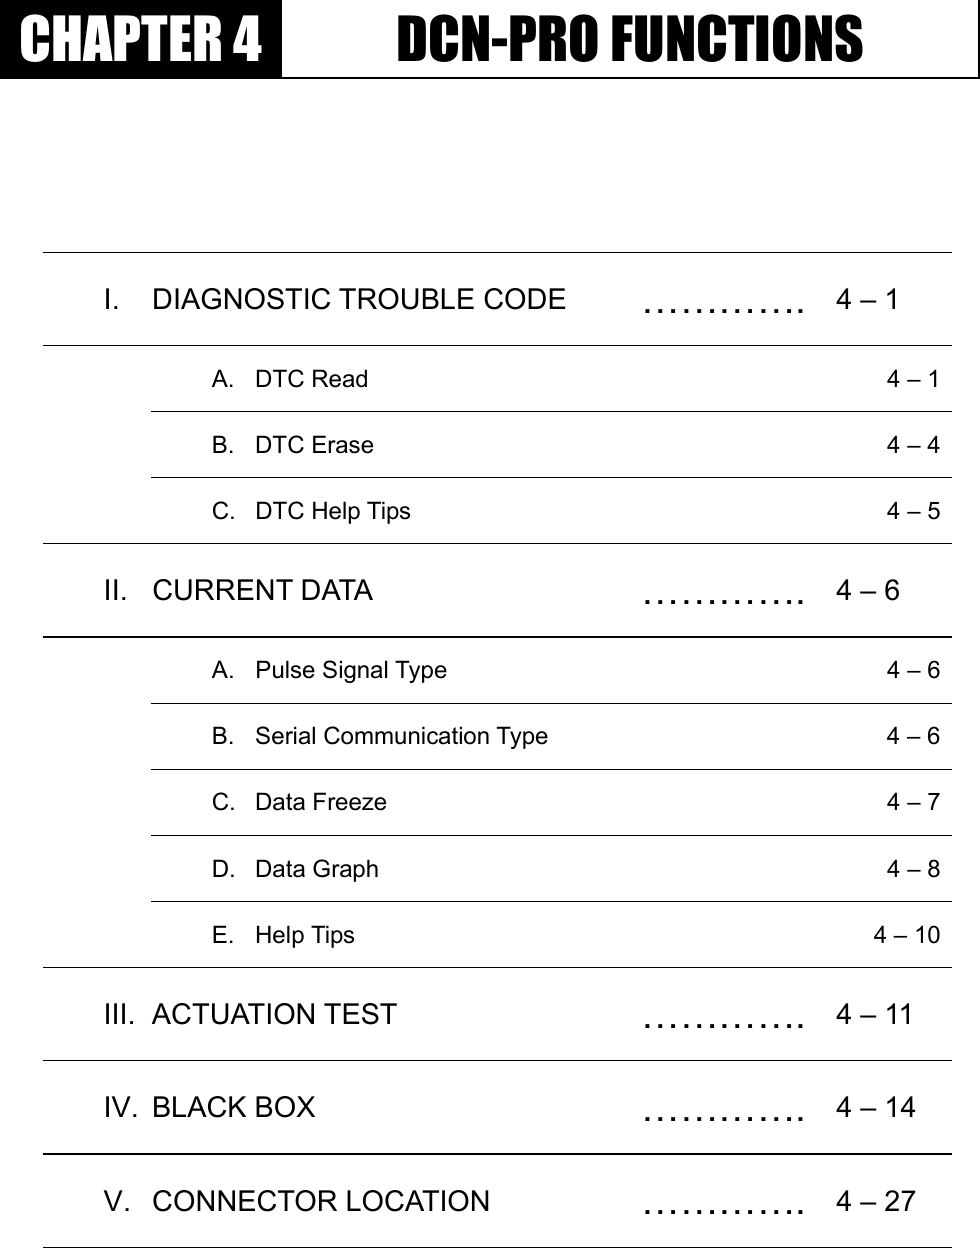 GGٻٻٻٻCHAPTER 4  DCN-PRO FUNCTIONS I. DIAGNOSTIC TROUBLE CODE  …………. 4 – 1   A.  DTC Read    4 – 1  B.  DTC Erase    4 – 4  C.  DTC Help Tips    4 – 5II. CURRENT DATA   …………. 4 – 6   A.  Pulse Signal Type    4 – 6  B.  Serial Communication Type    4 – 6  C.  Data Freeze    4 – 7  D.  Data Graph    4 – 8 E. Help Tips    4 – 10III. ACTUATION TEST  …………. 4 – 11 IV. BLACK BOX  …………. 4 – 14 V. CONNECTOR LOCATION  …………. 4 – 27 G